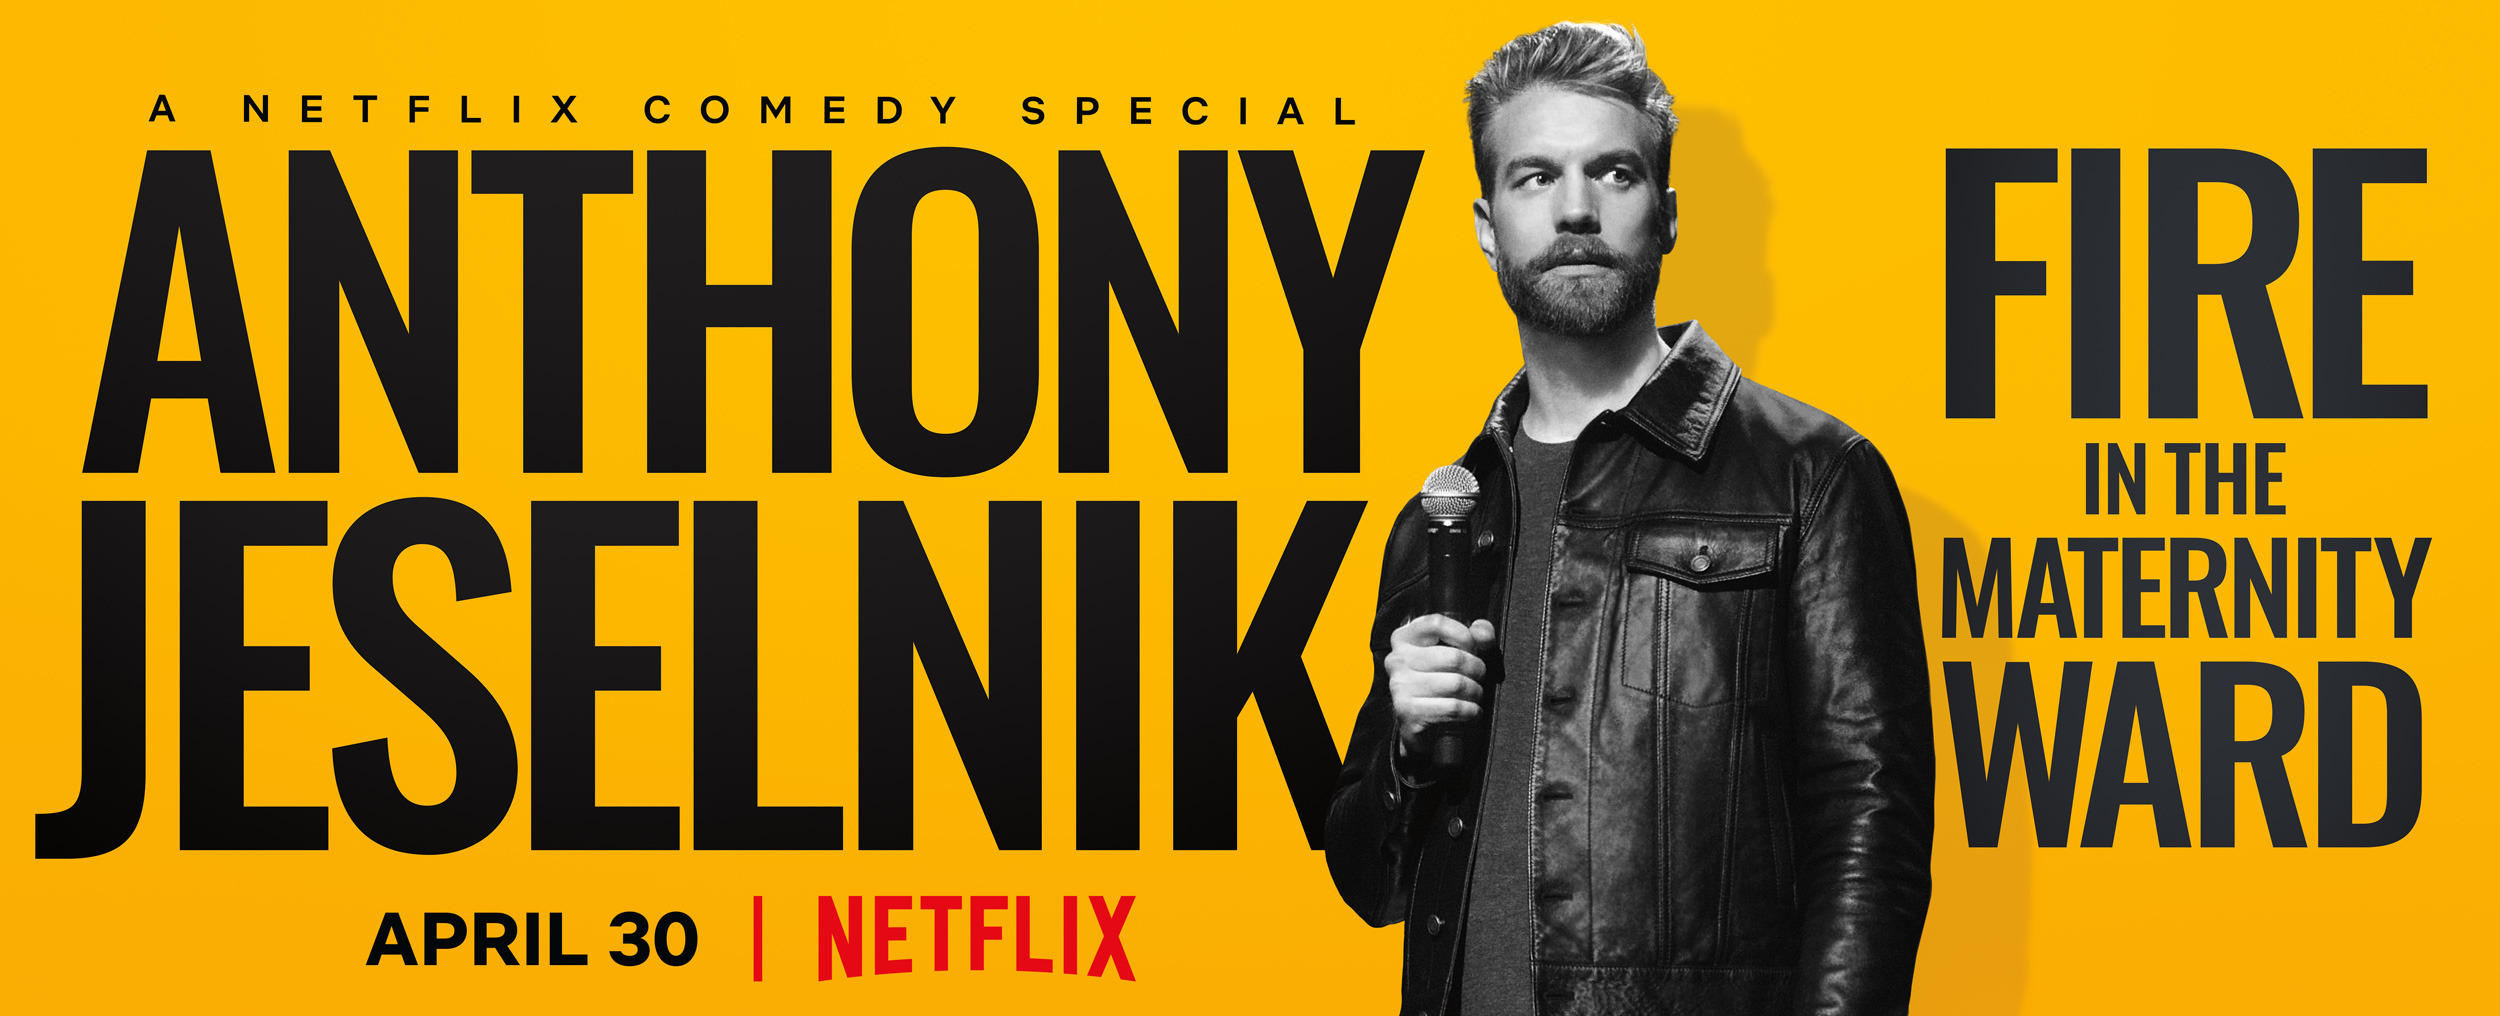 Mega Sized TV Poster Image for Anthony Jeselnik: Fire in the Maternity Ward 